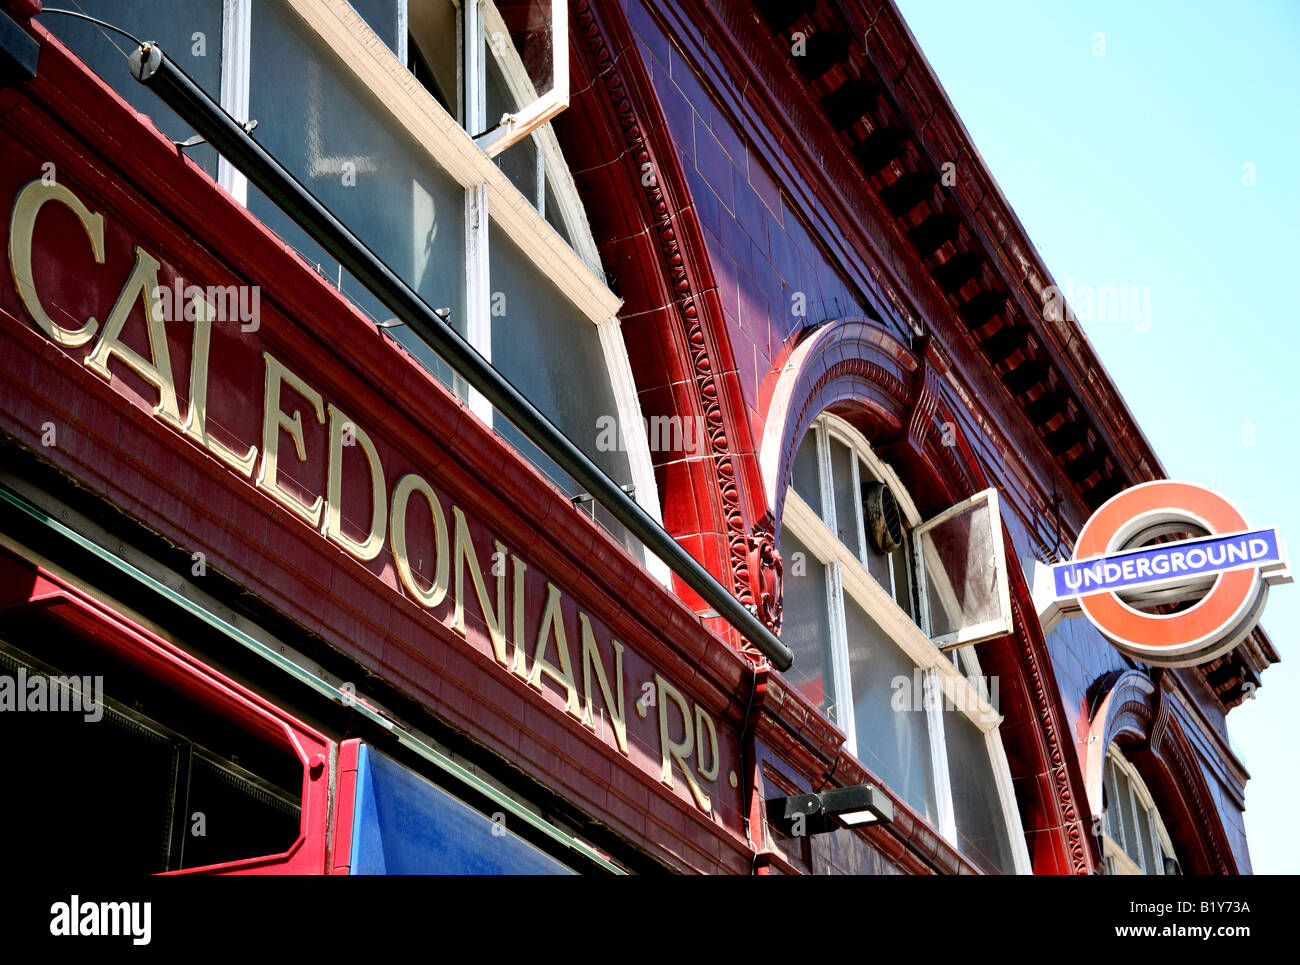 Detail der Caledonian Road Piccadilly Line-Station in London Stockfoto